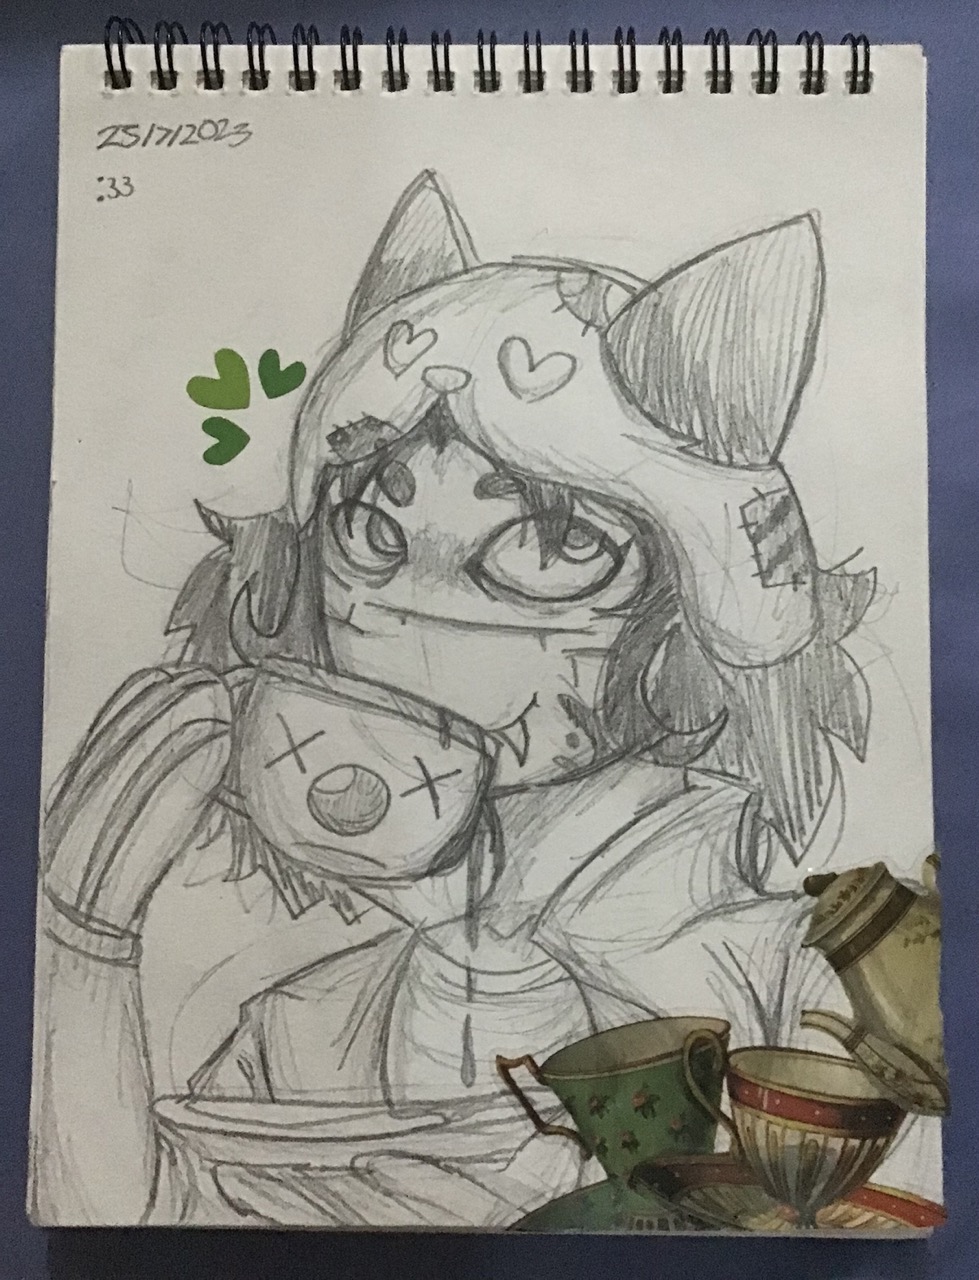 A traditional drawing of Nepeta enjoying a cup of tea.